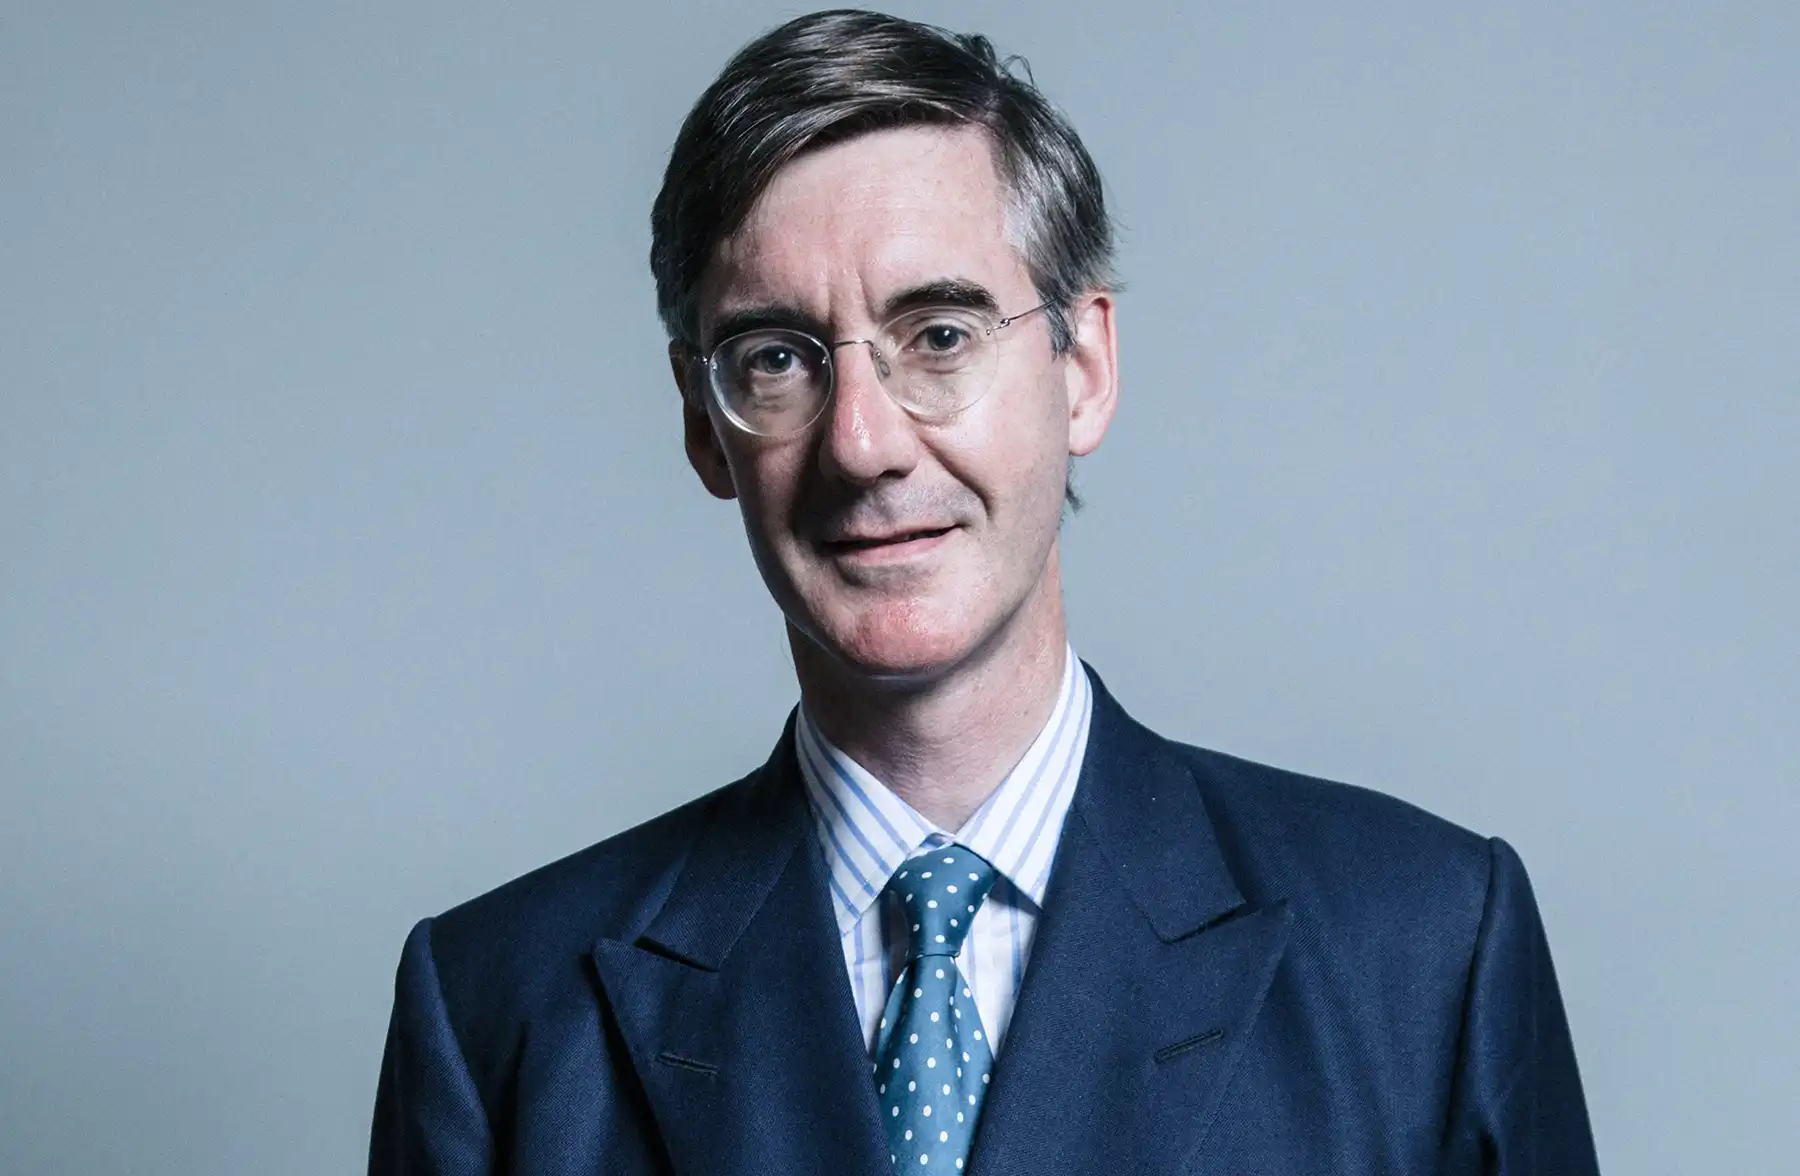 MP Jacob Rees-Mogg (Con, North East Somerset) is understood to be a member of the Garrick Club